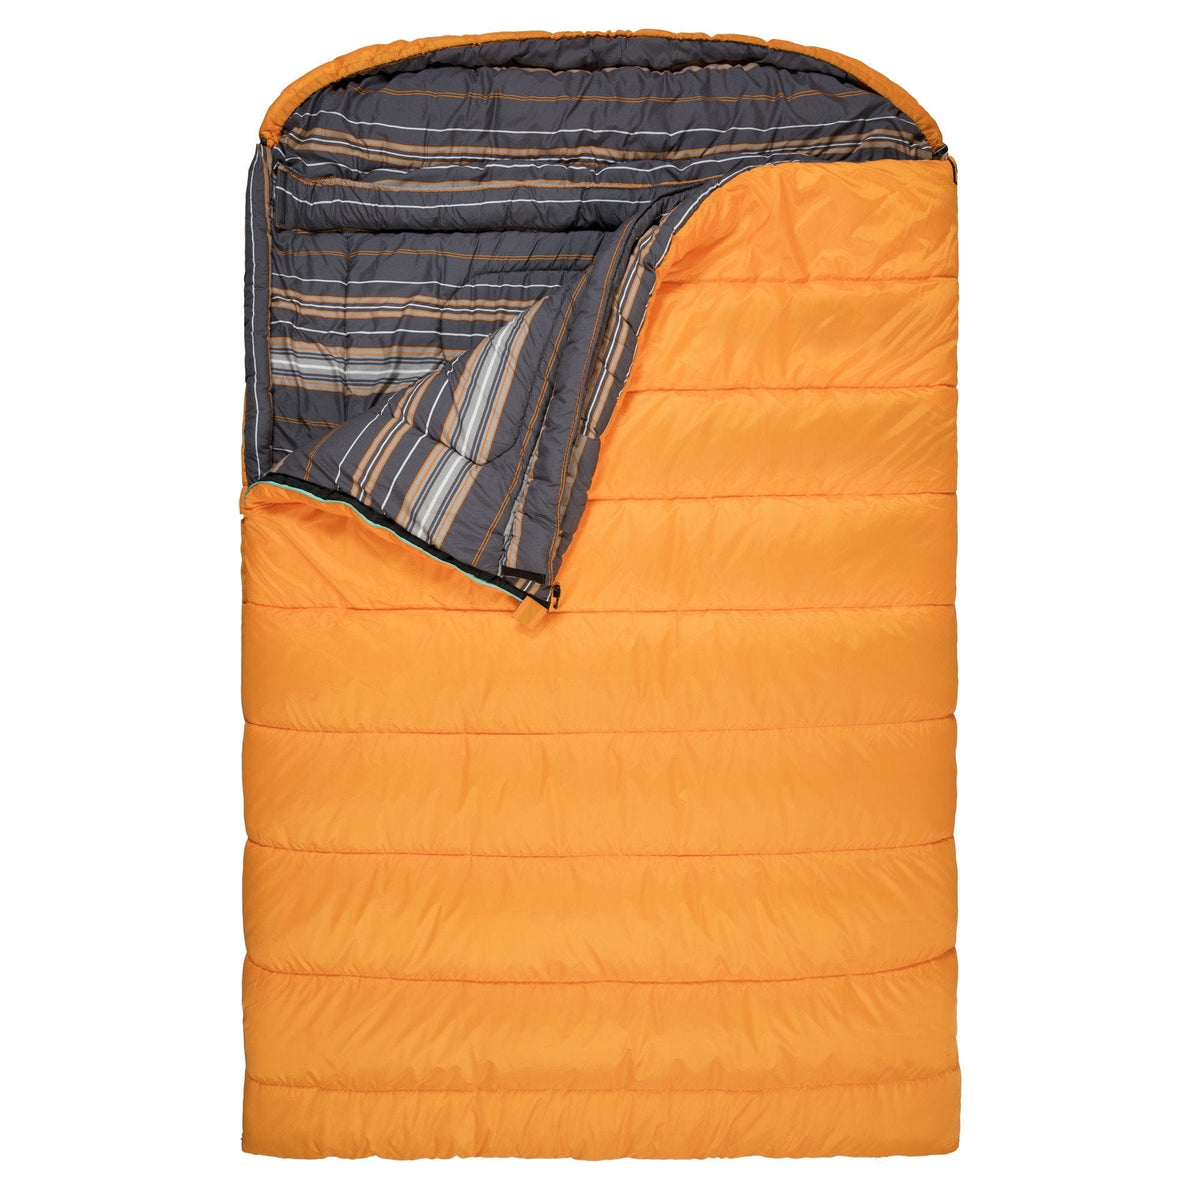 The best sleeping bags for Kilimanjaro